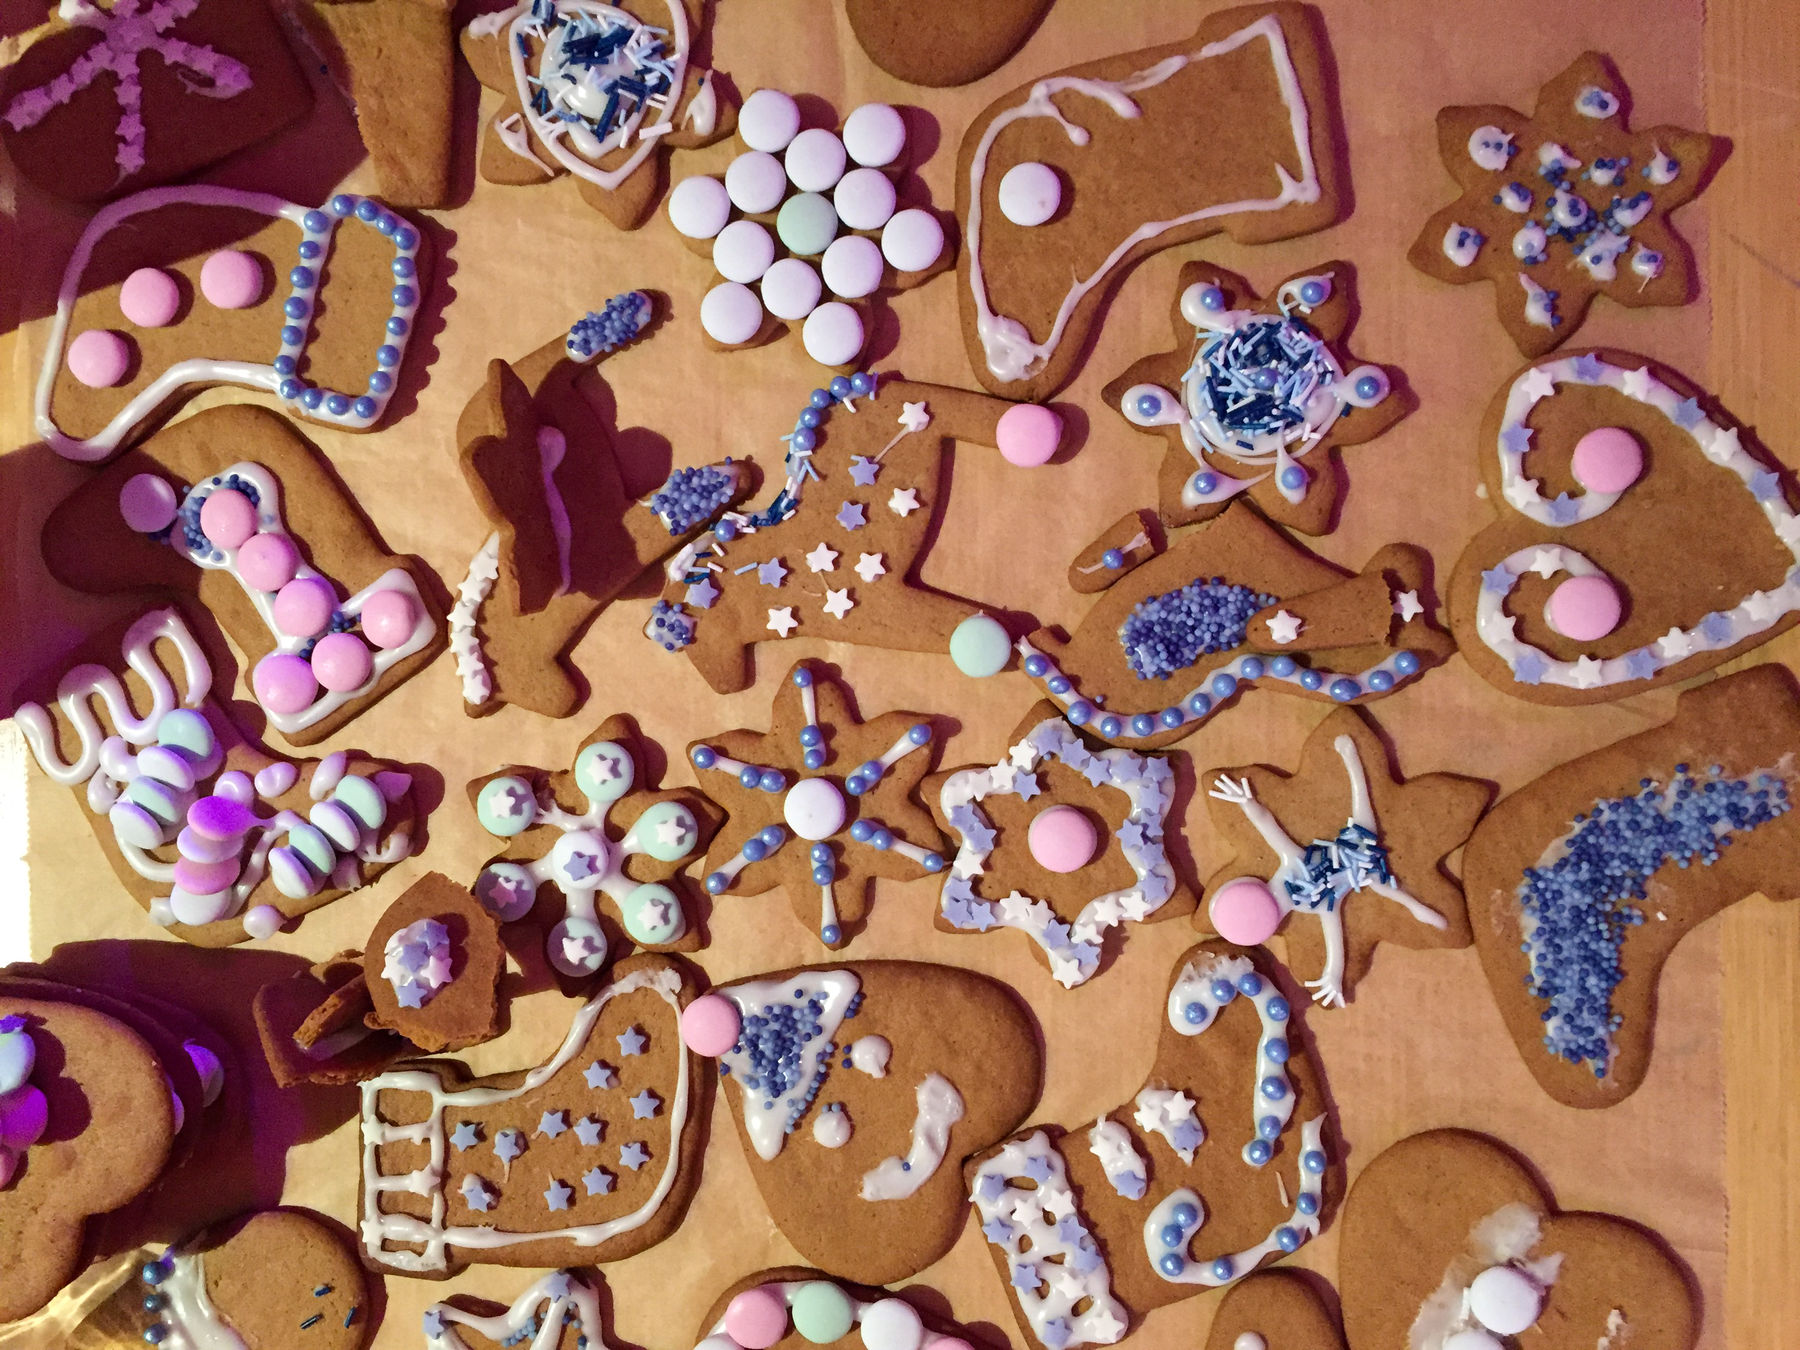 Gingerbread decorated by our creative community